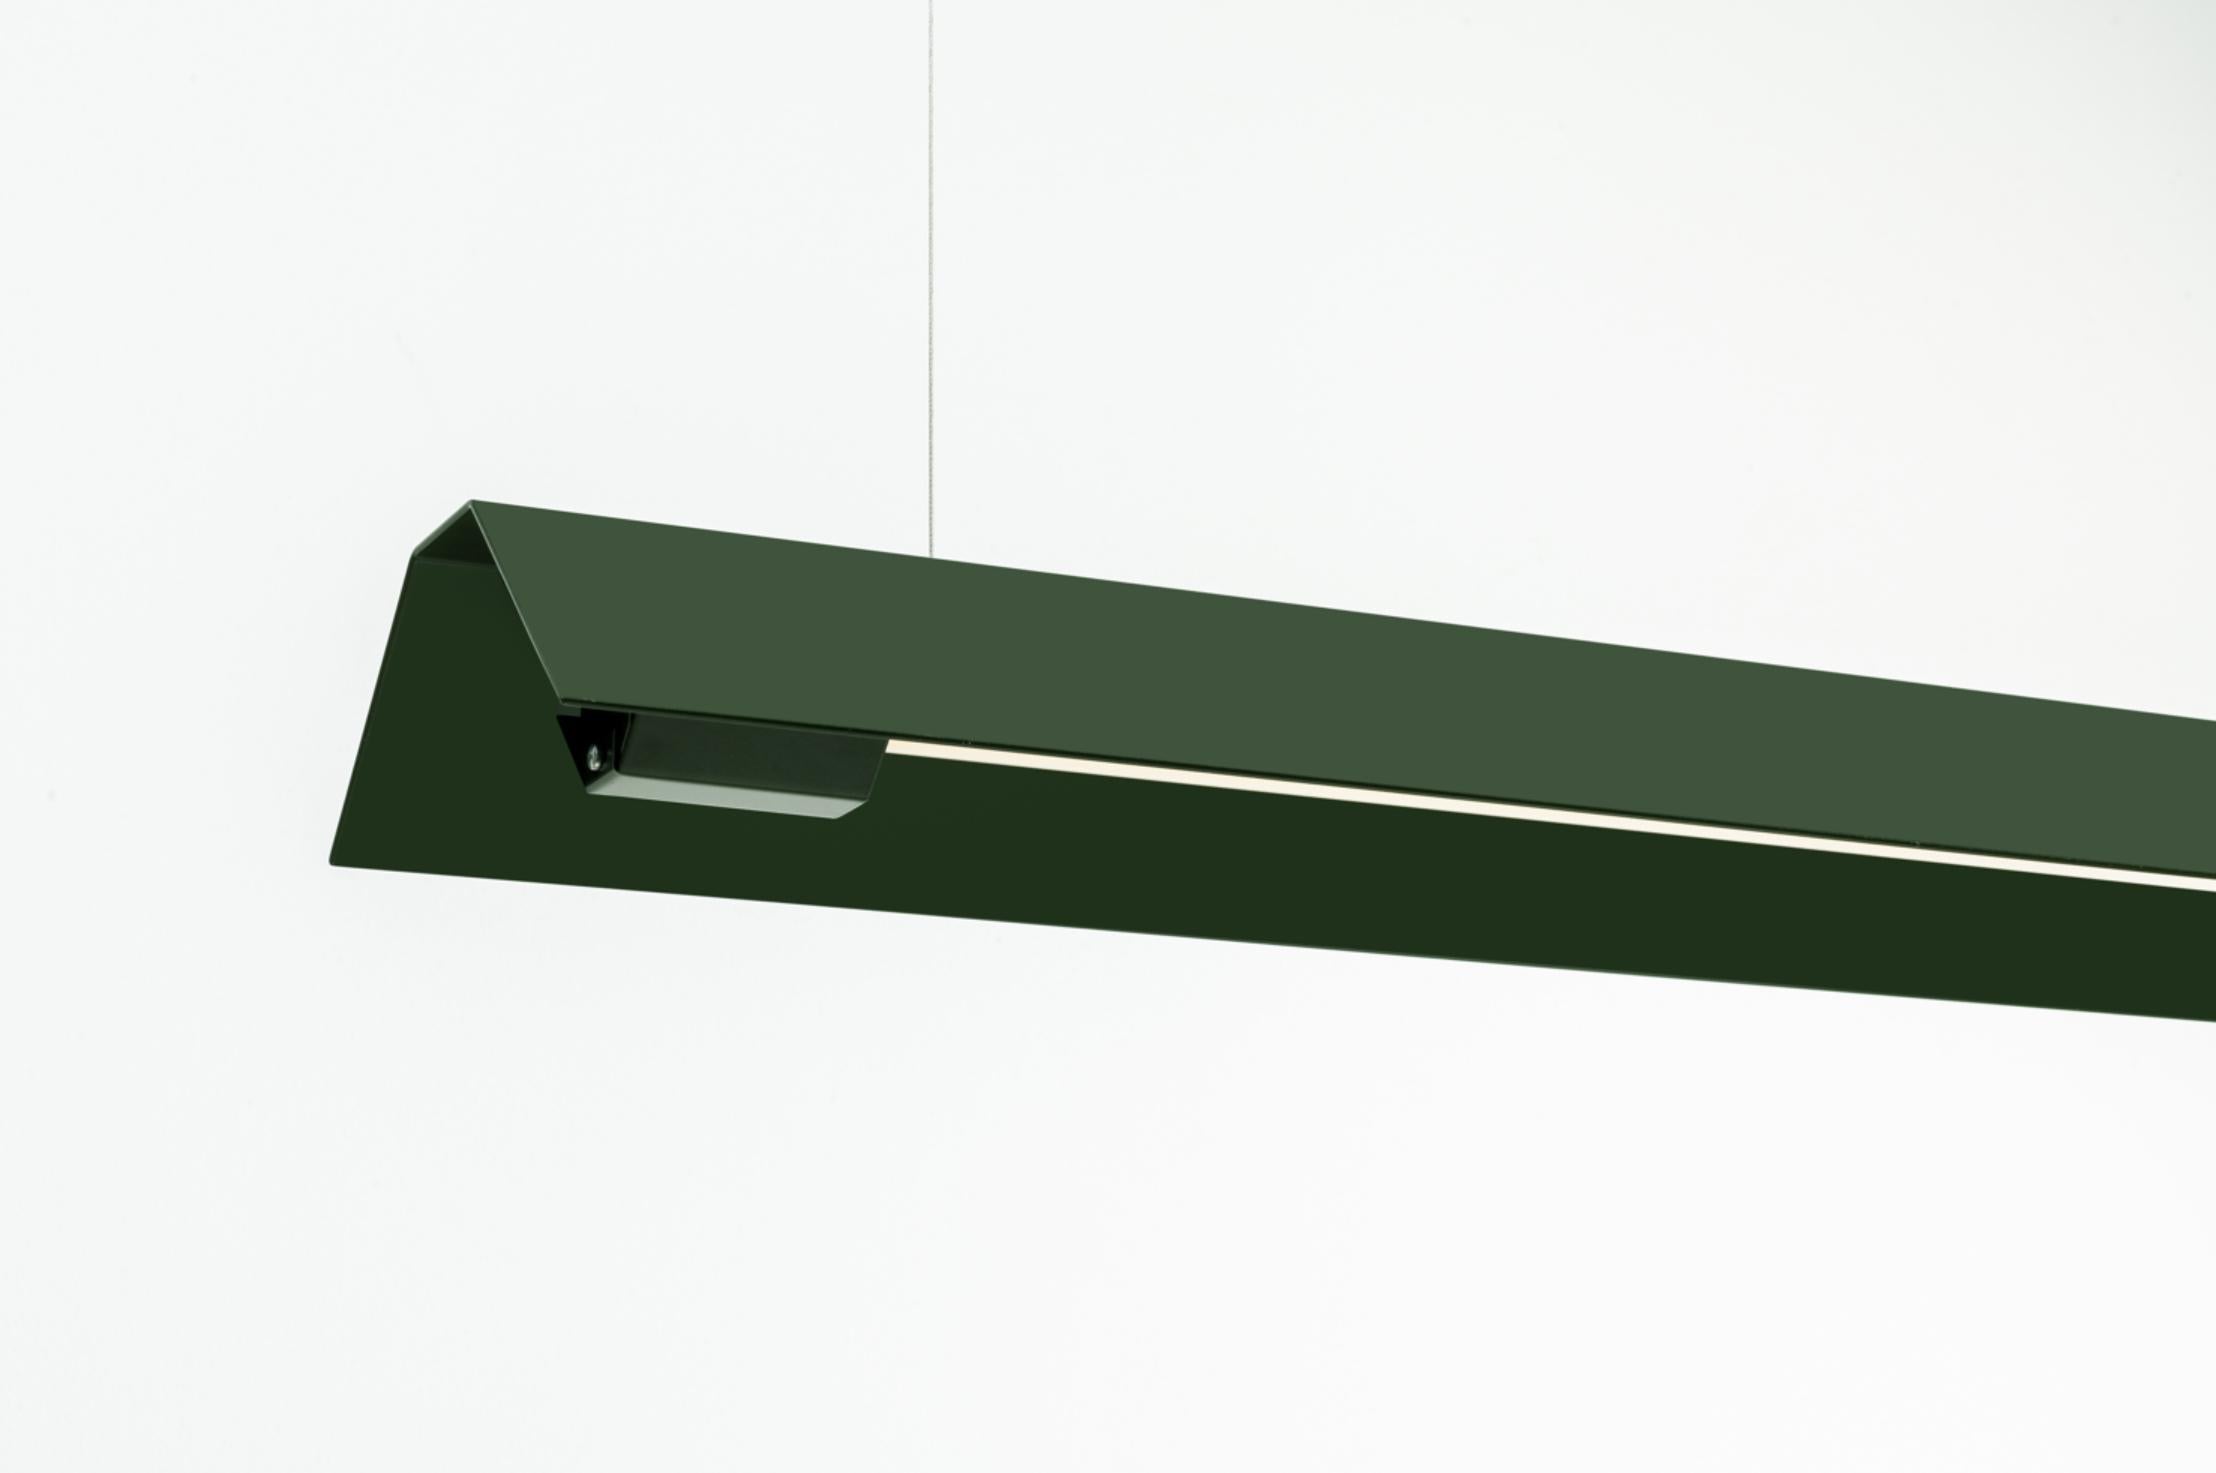 Large Misalliance Ral bottle green suspended light by Lexavala
Dimensions: D 16 x W 130 x H 8 cm
Materials: powder coated aluminium.

There are two lenghts of socket covers, extending over the LED. Two short are to be found in Suspended and